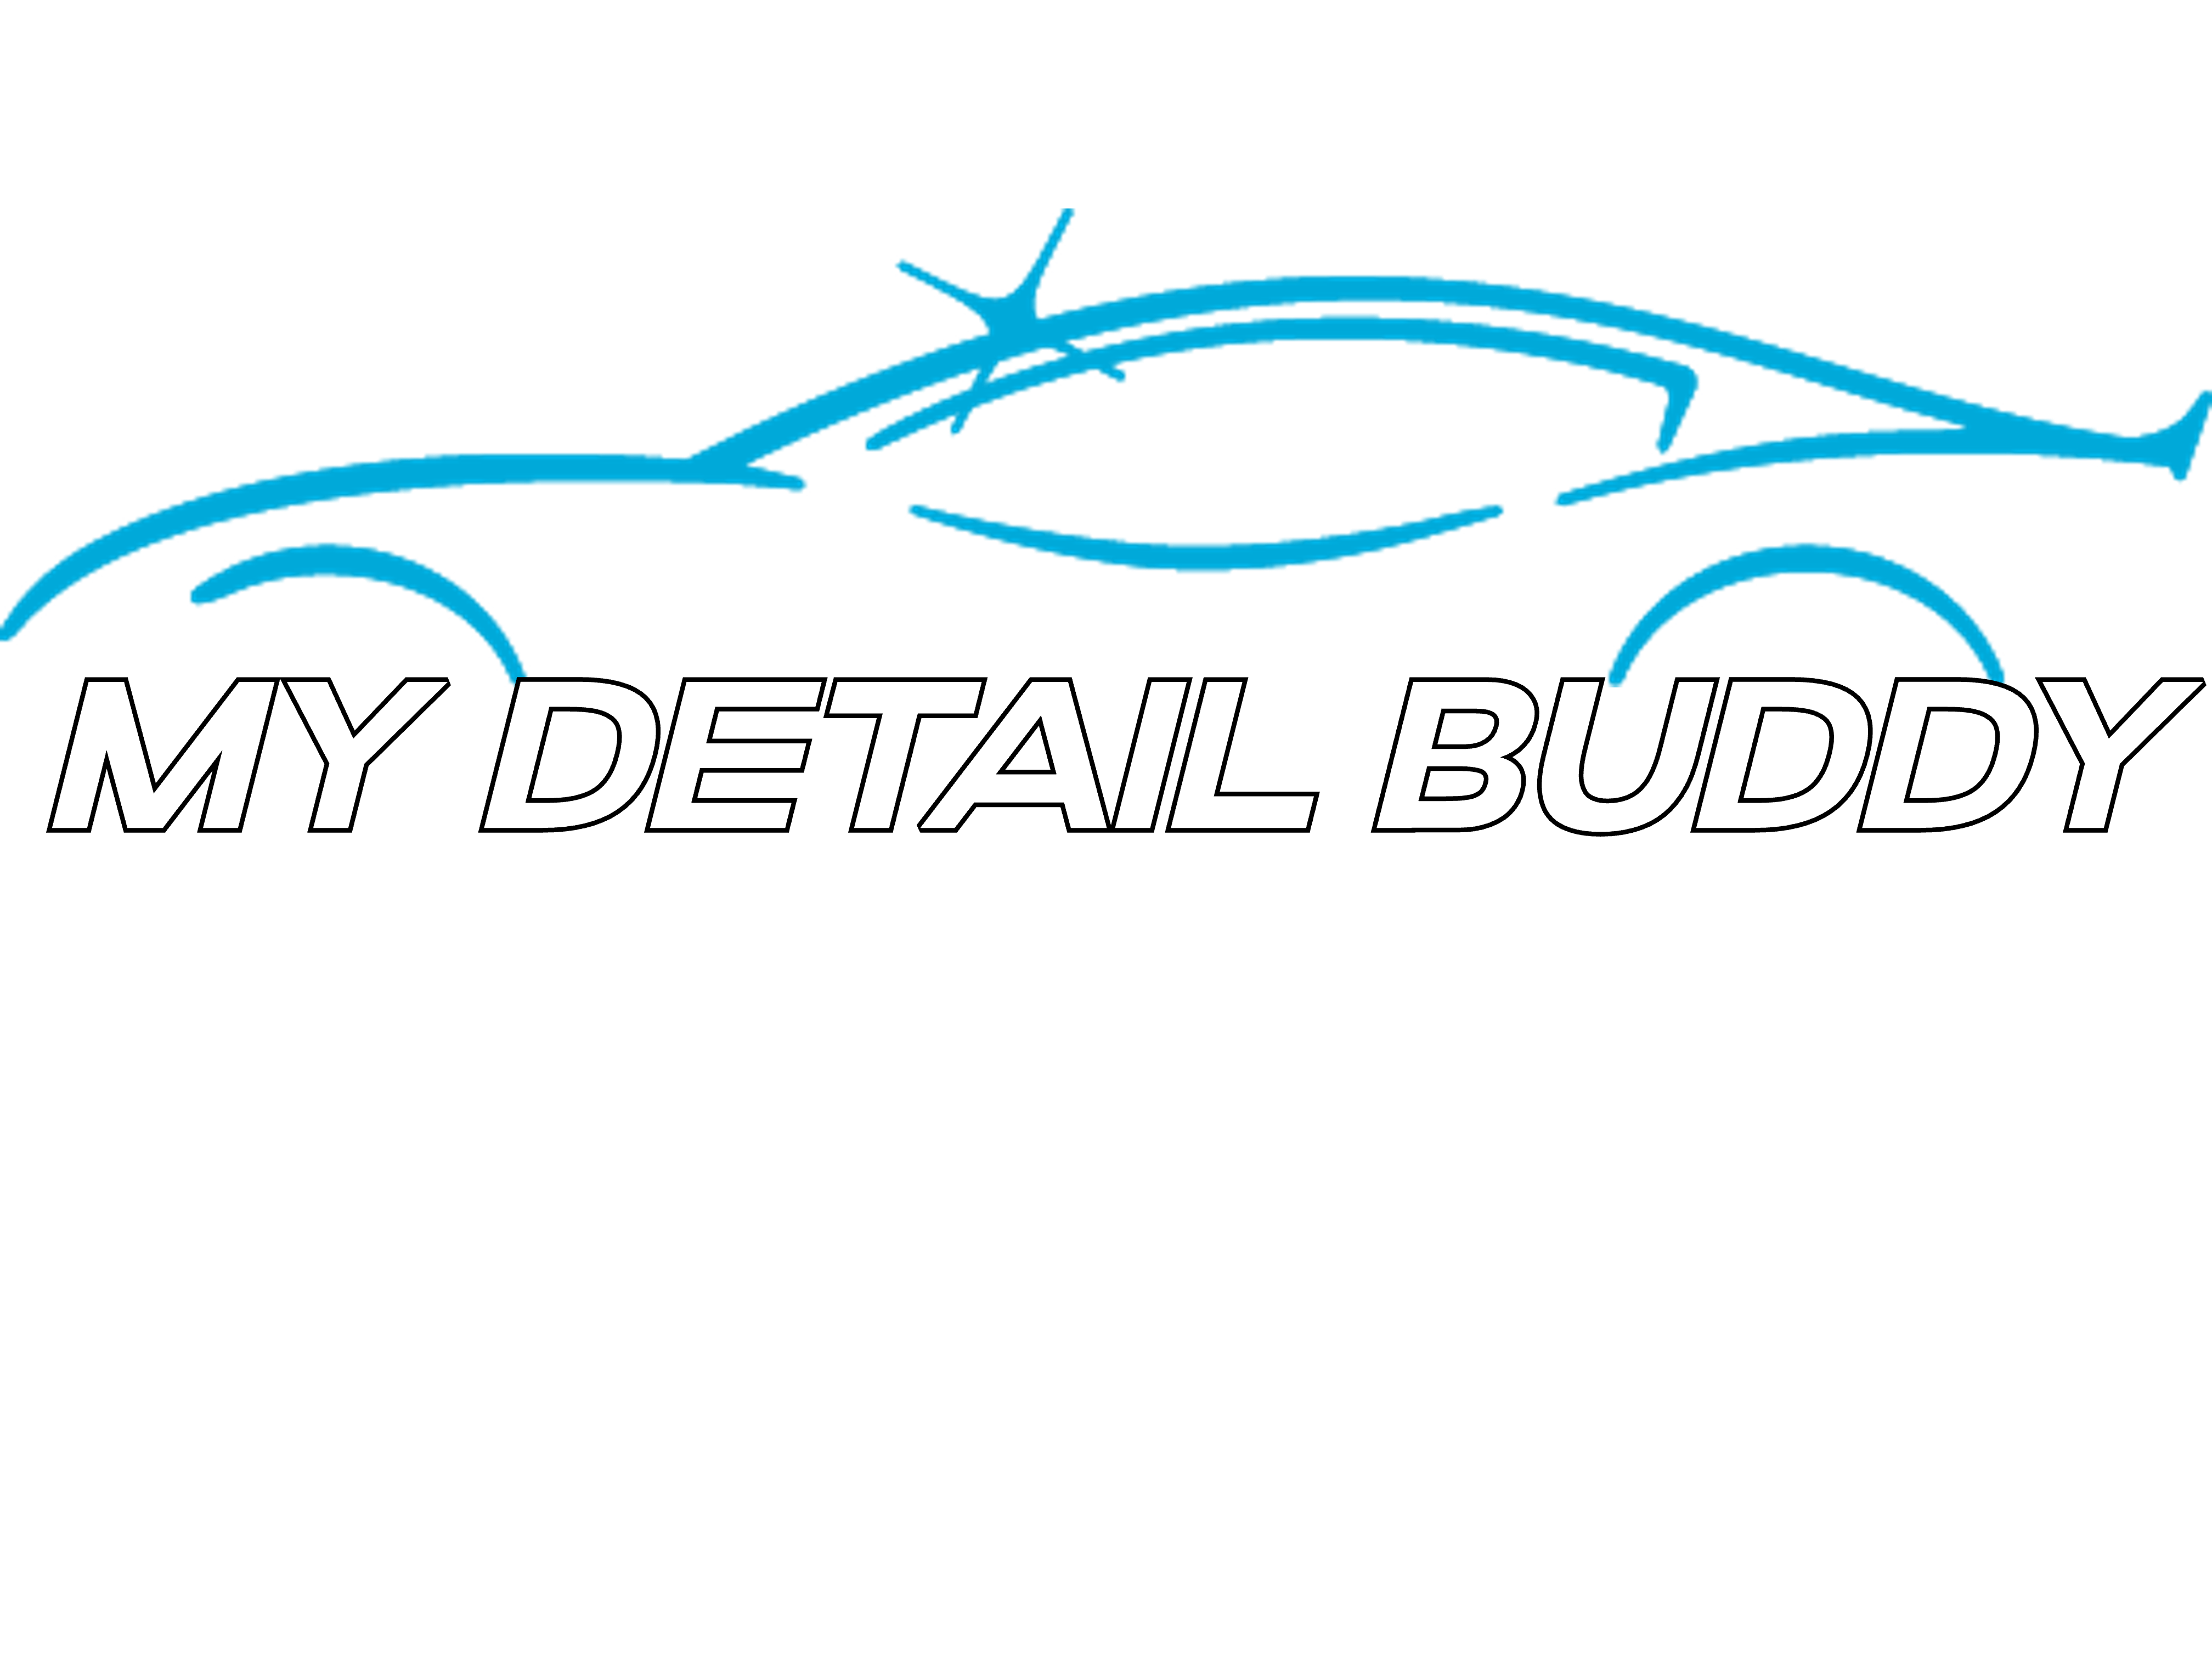 My Detail Buddy: Elevating Auto Detailing & Your Local Detailer